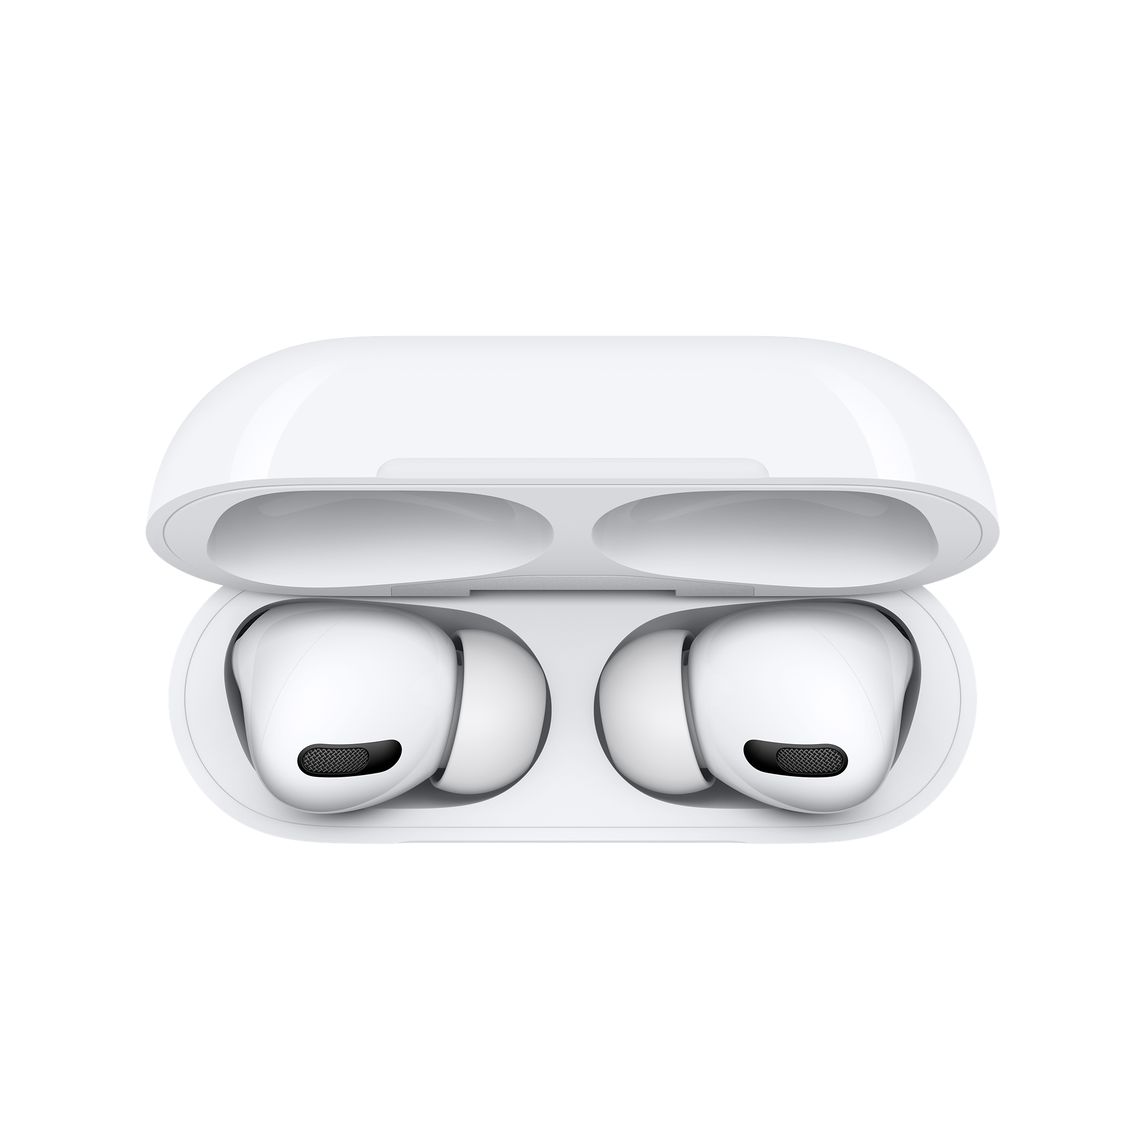 Apple Airpods Pro 2021 MagSafe Charging